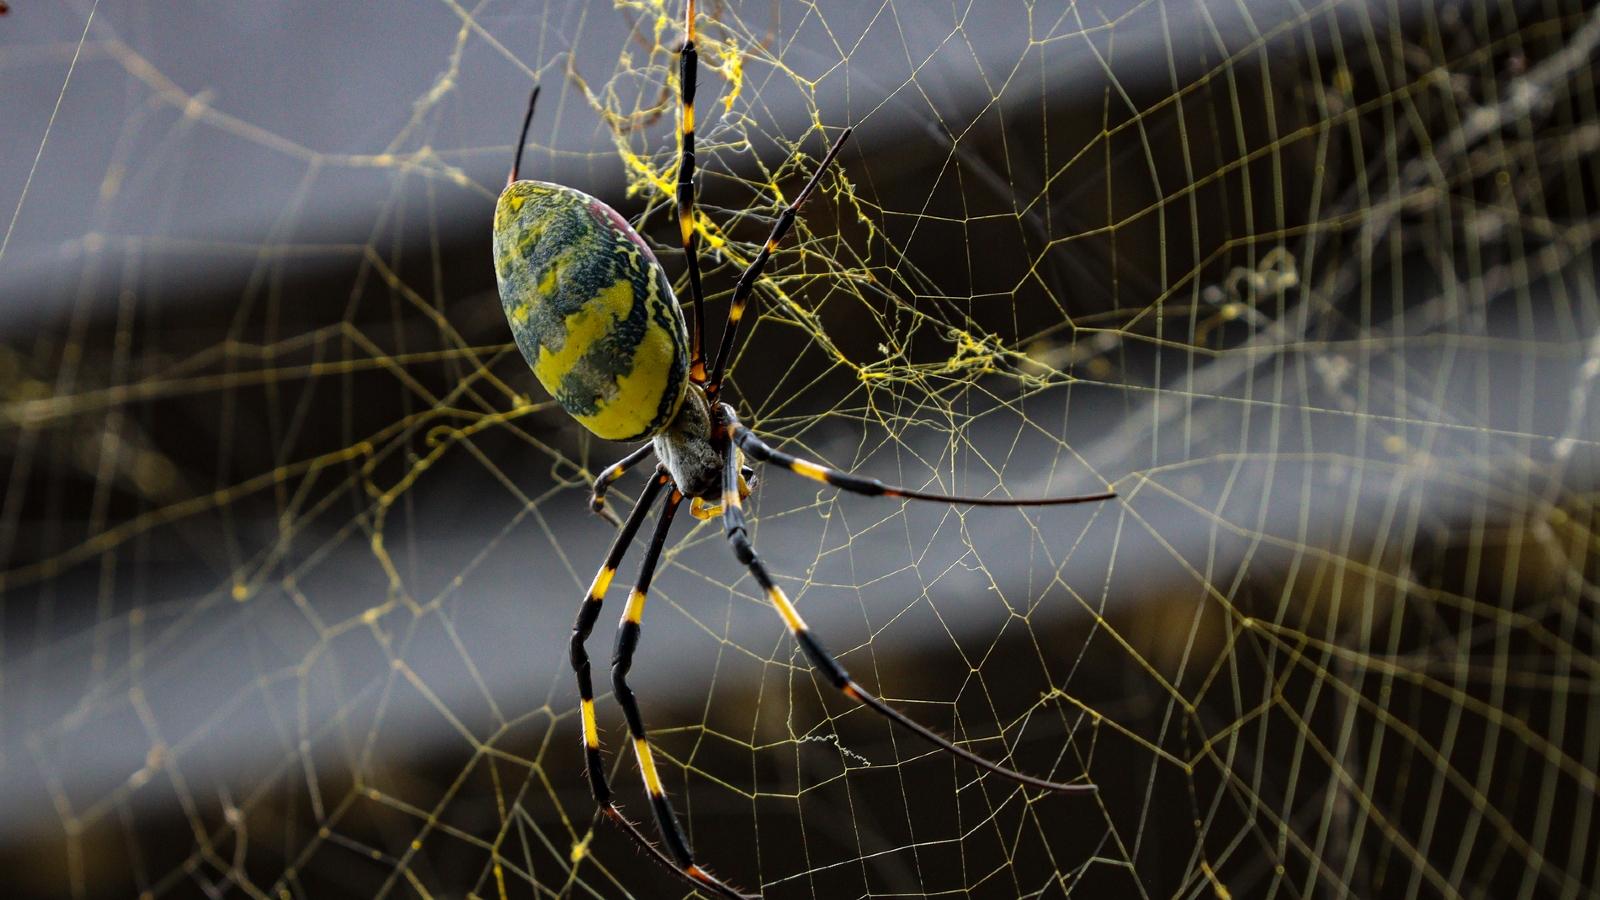 Giant, invasive Joro spiders with 6-foot webs could be poised to take over  US cities, scientists warn